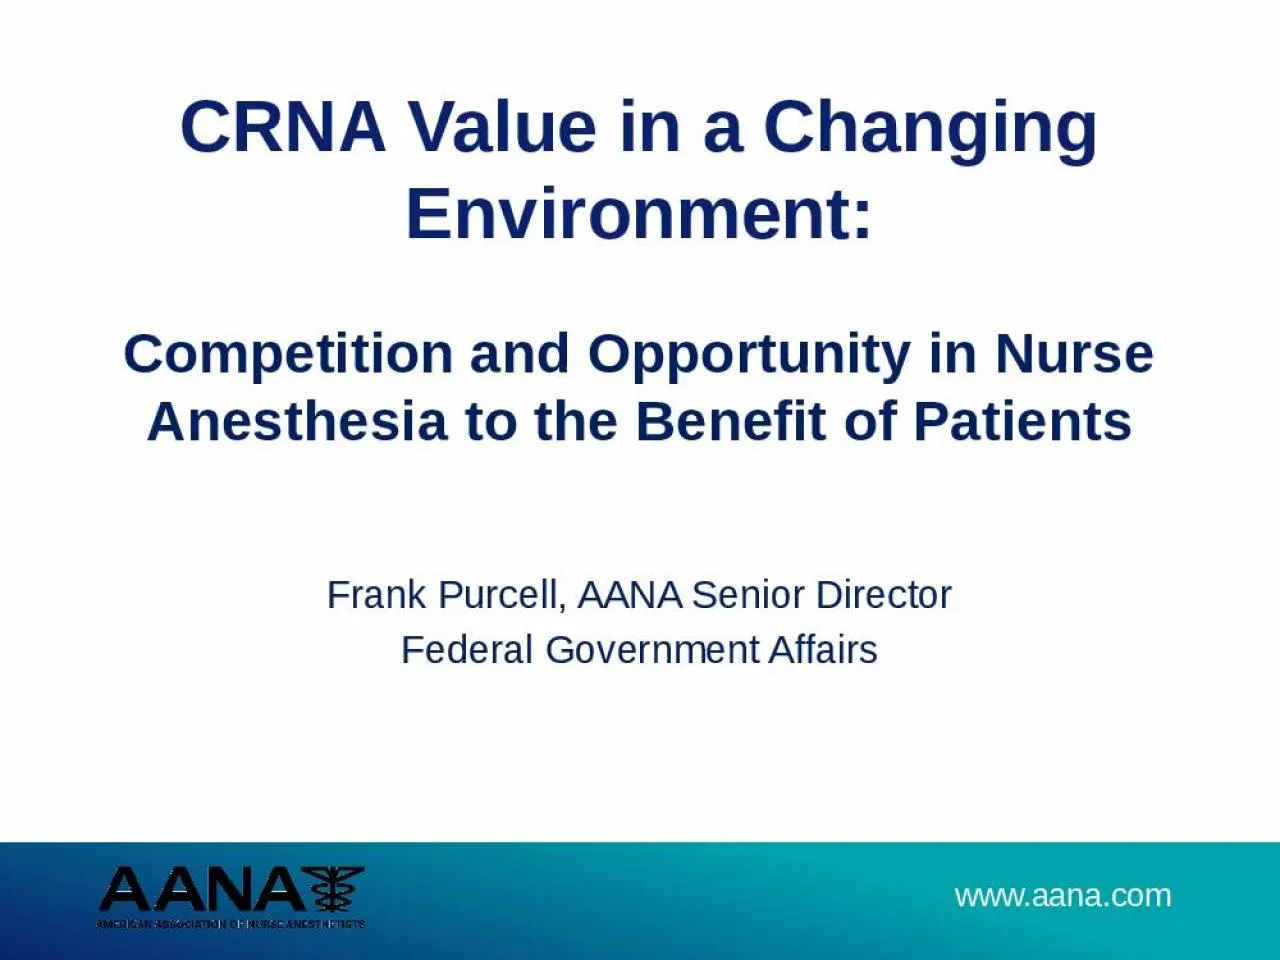 Competition and Opportunity in Nurse Anesthesia to the Benefit of Patients